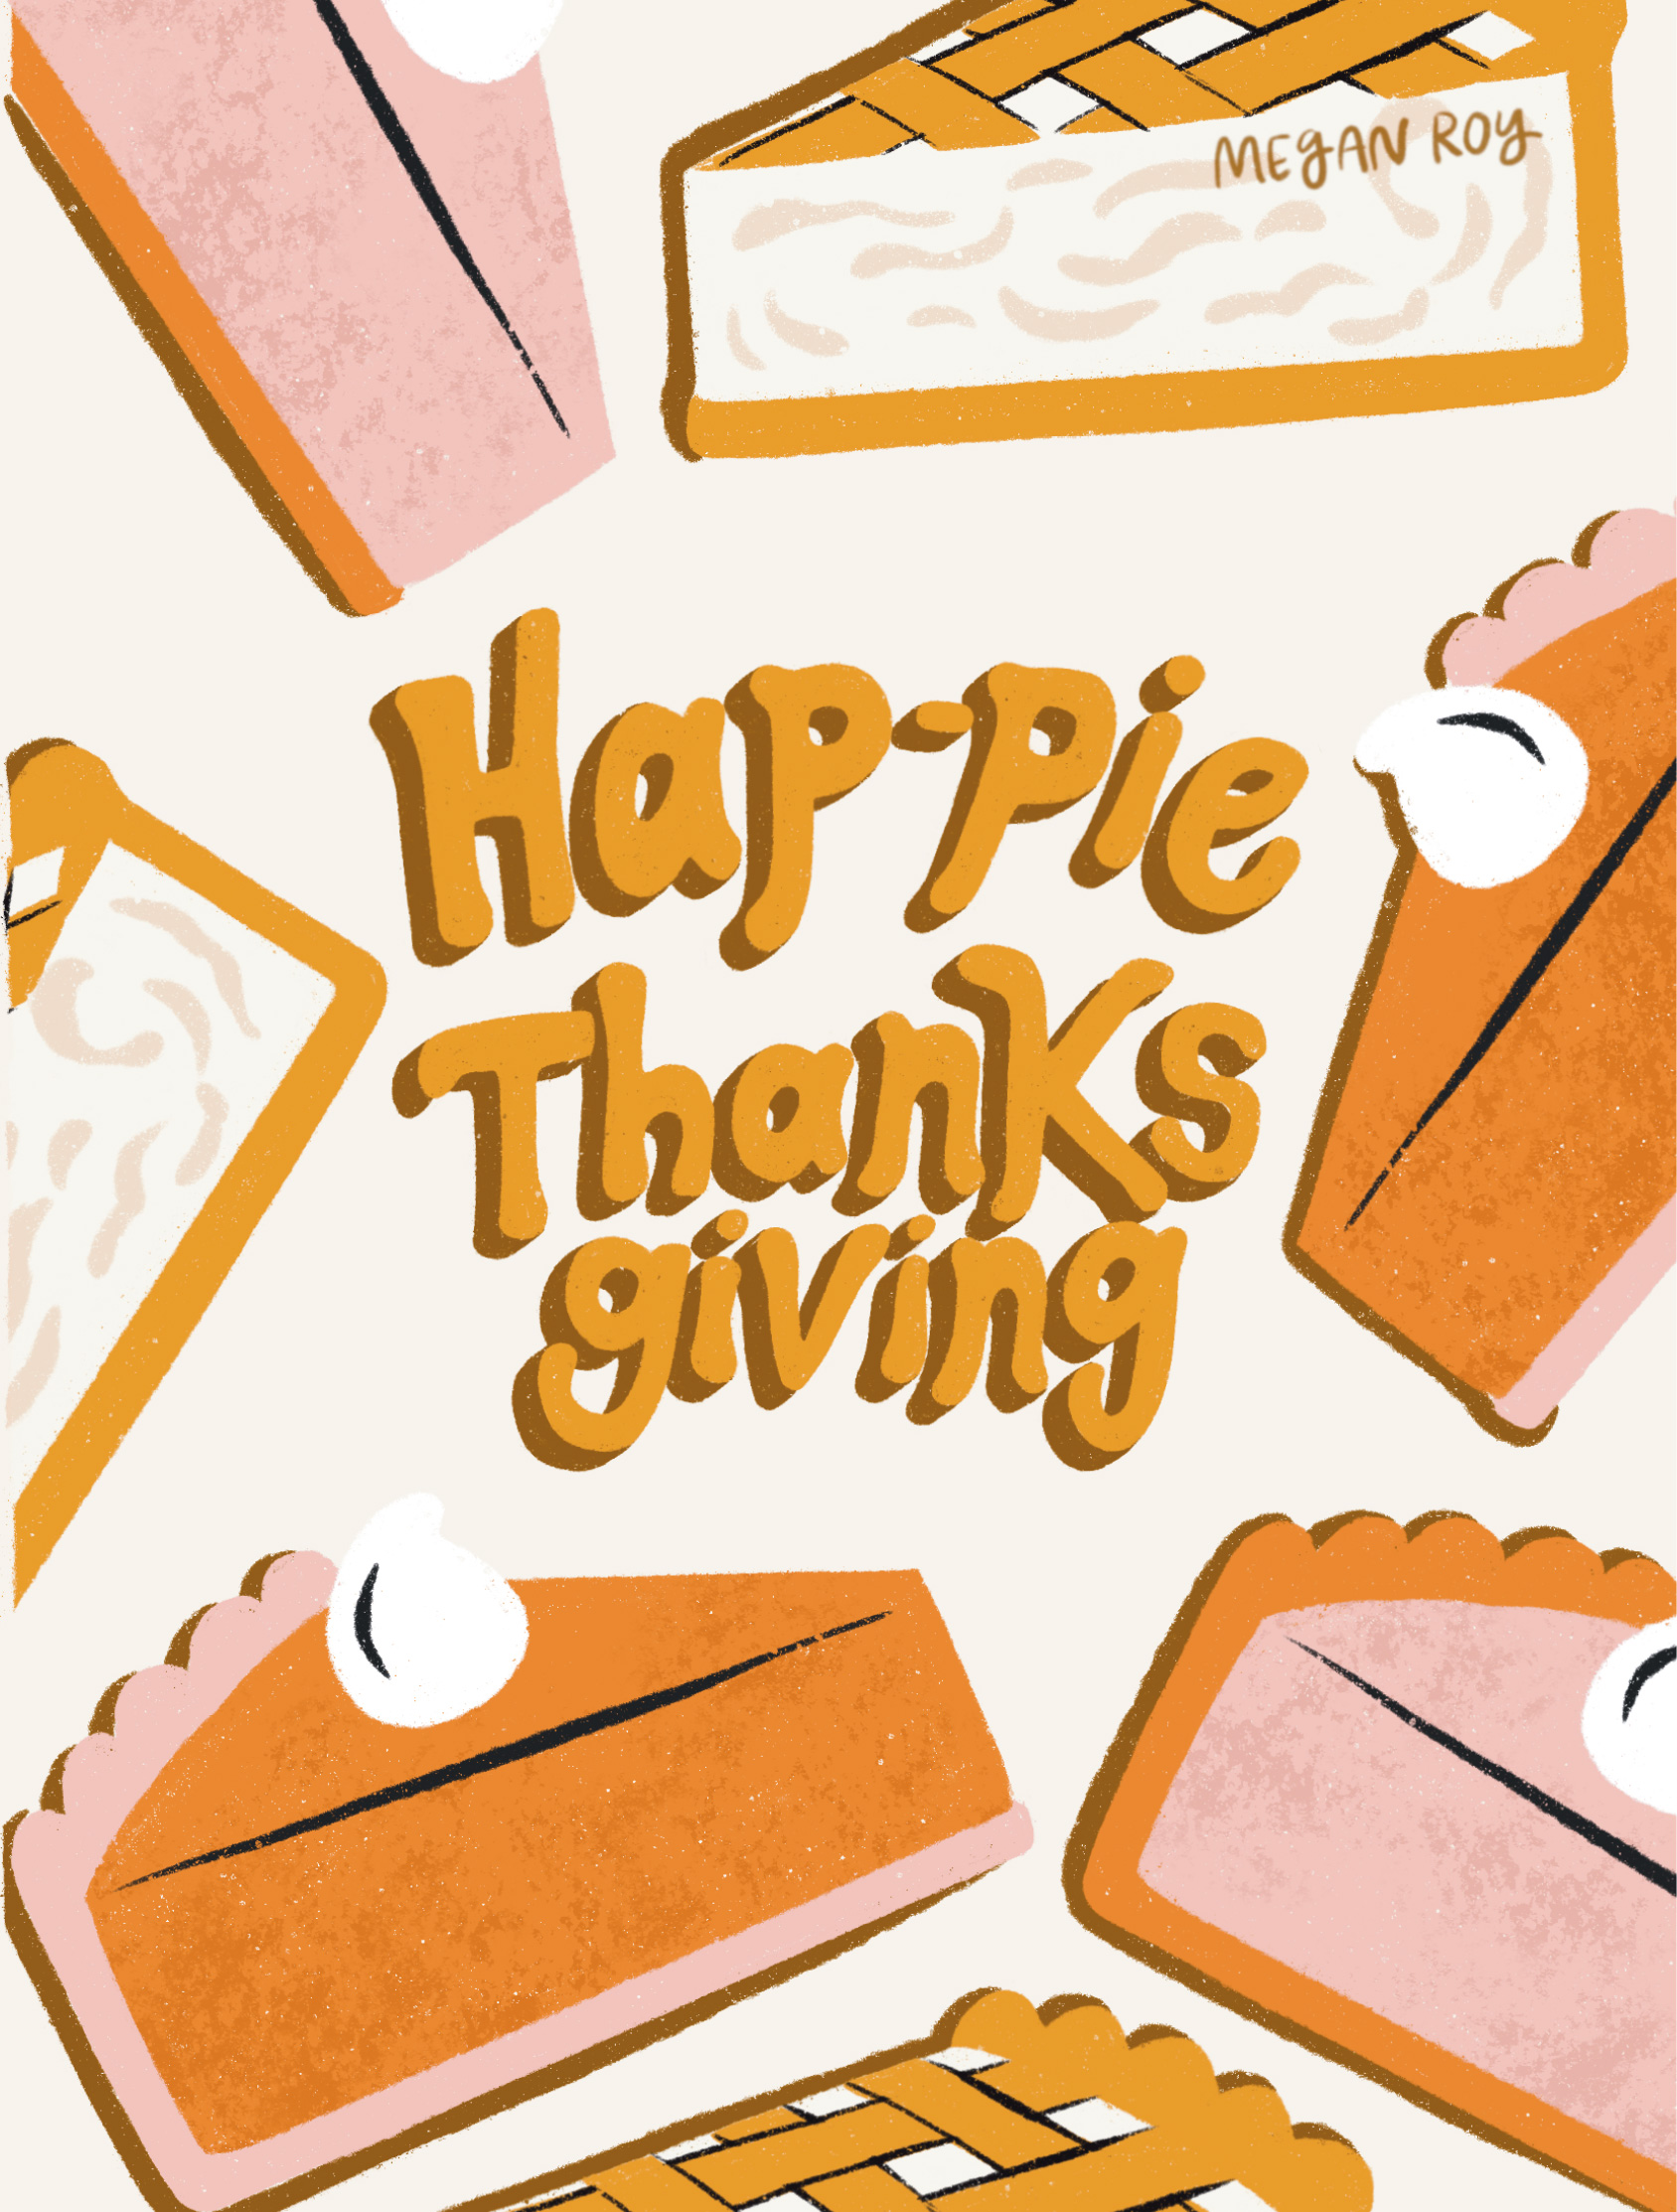 Hap-pie Thanksgiving Card - The image shows a Thanksgiving card with pies